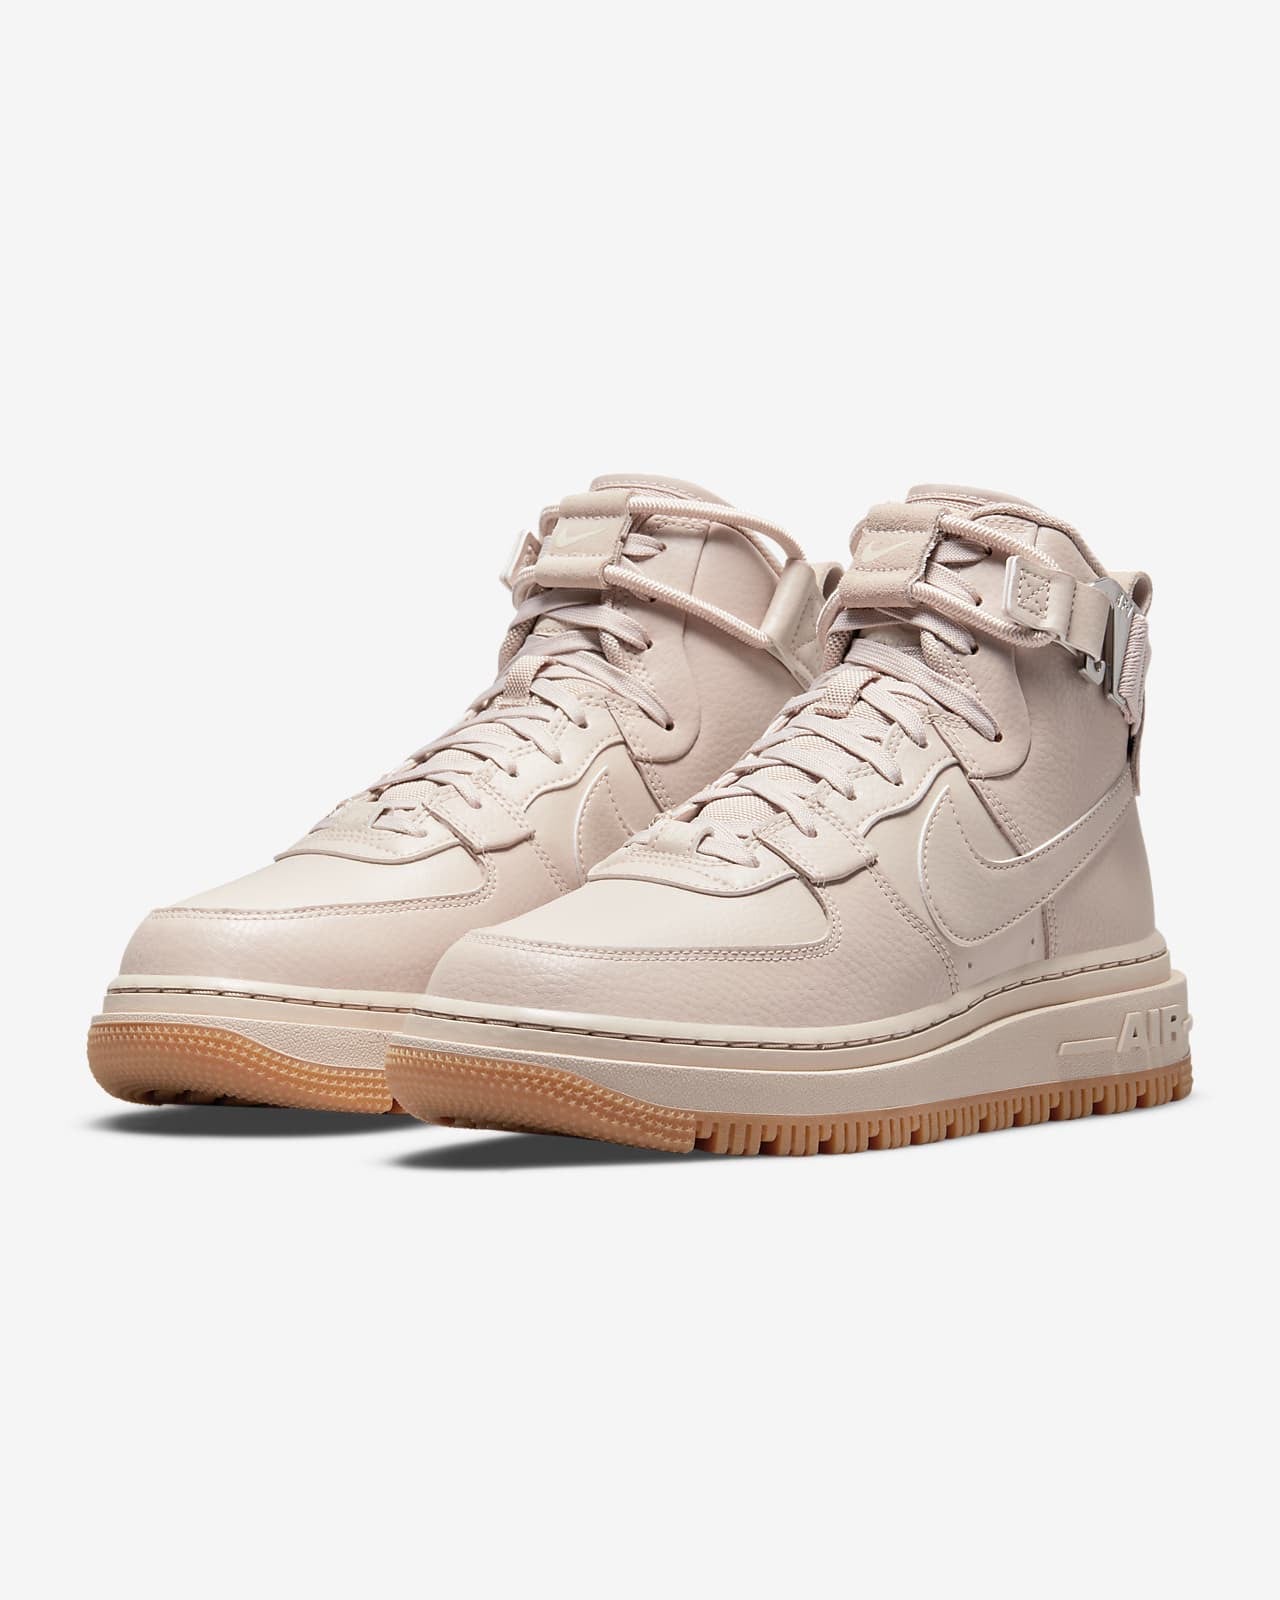 kom tot rust subtiel Fervent Nike Air Force 1 High Utility 2.0 – shoesday.ro